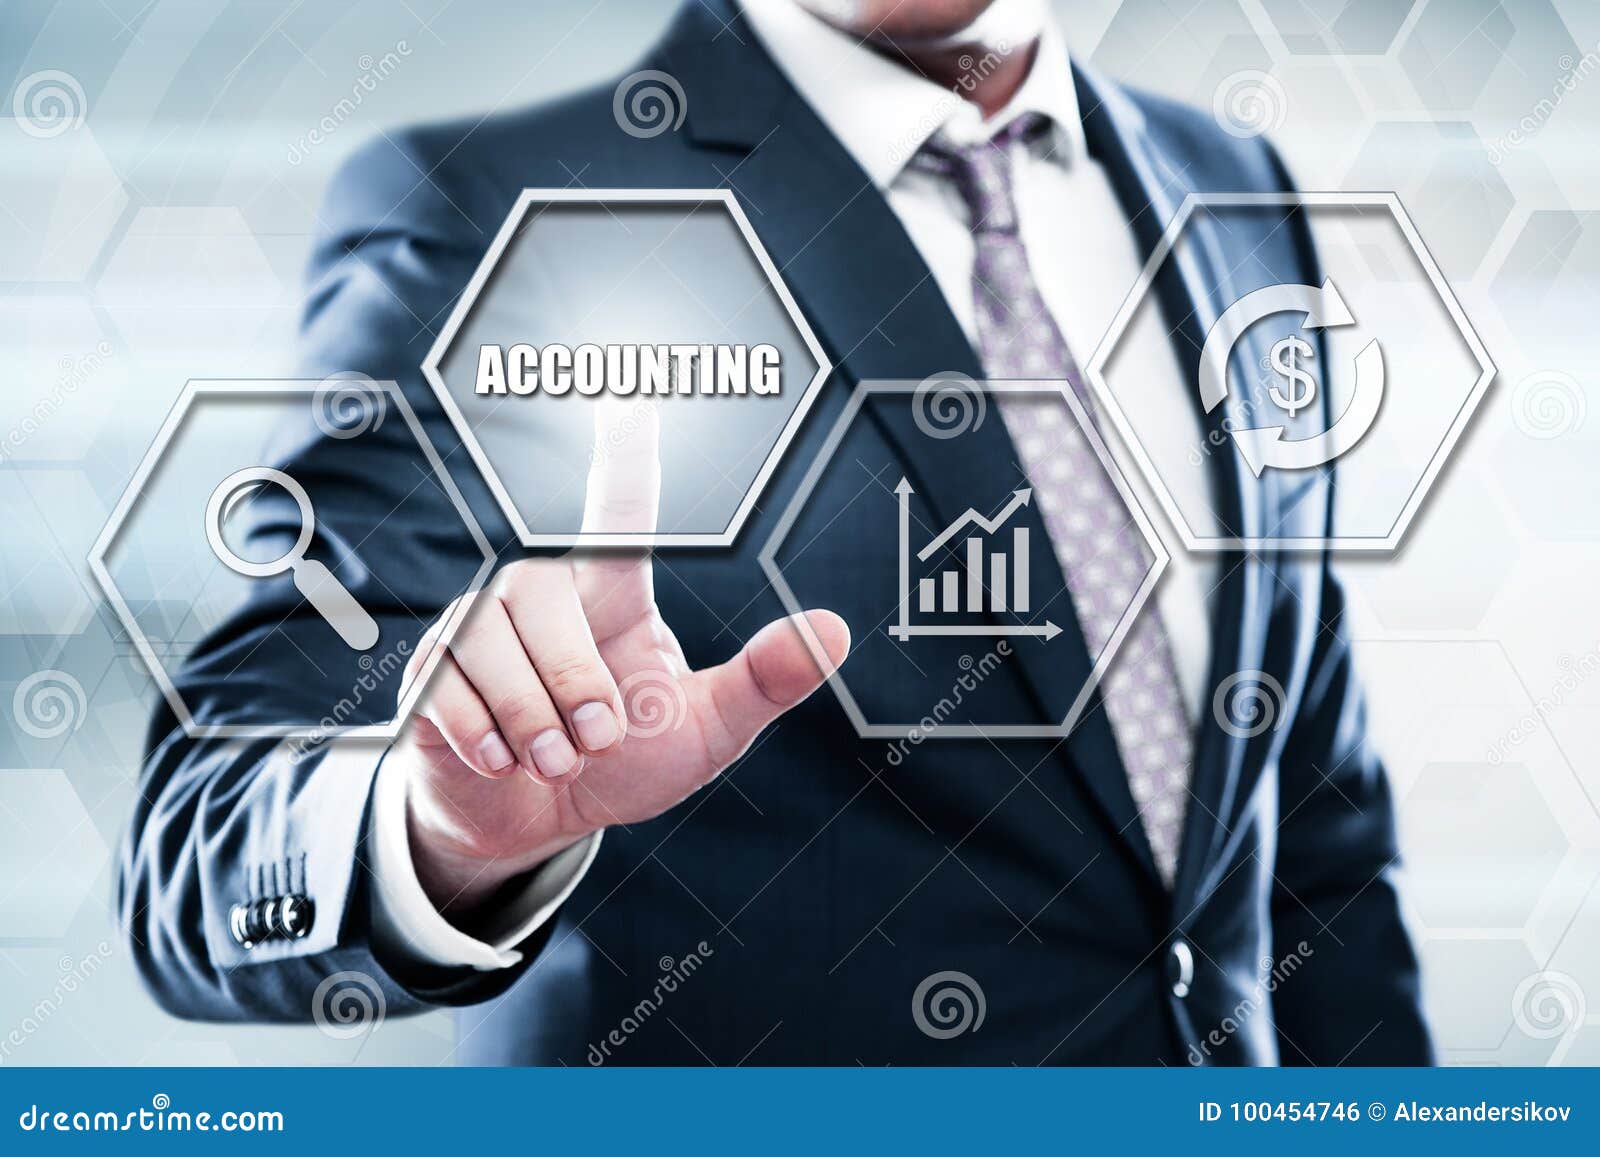 businessman pressing button on touch screen interface and select accounting